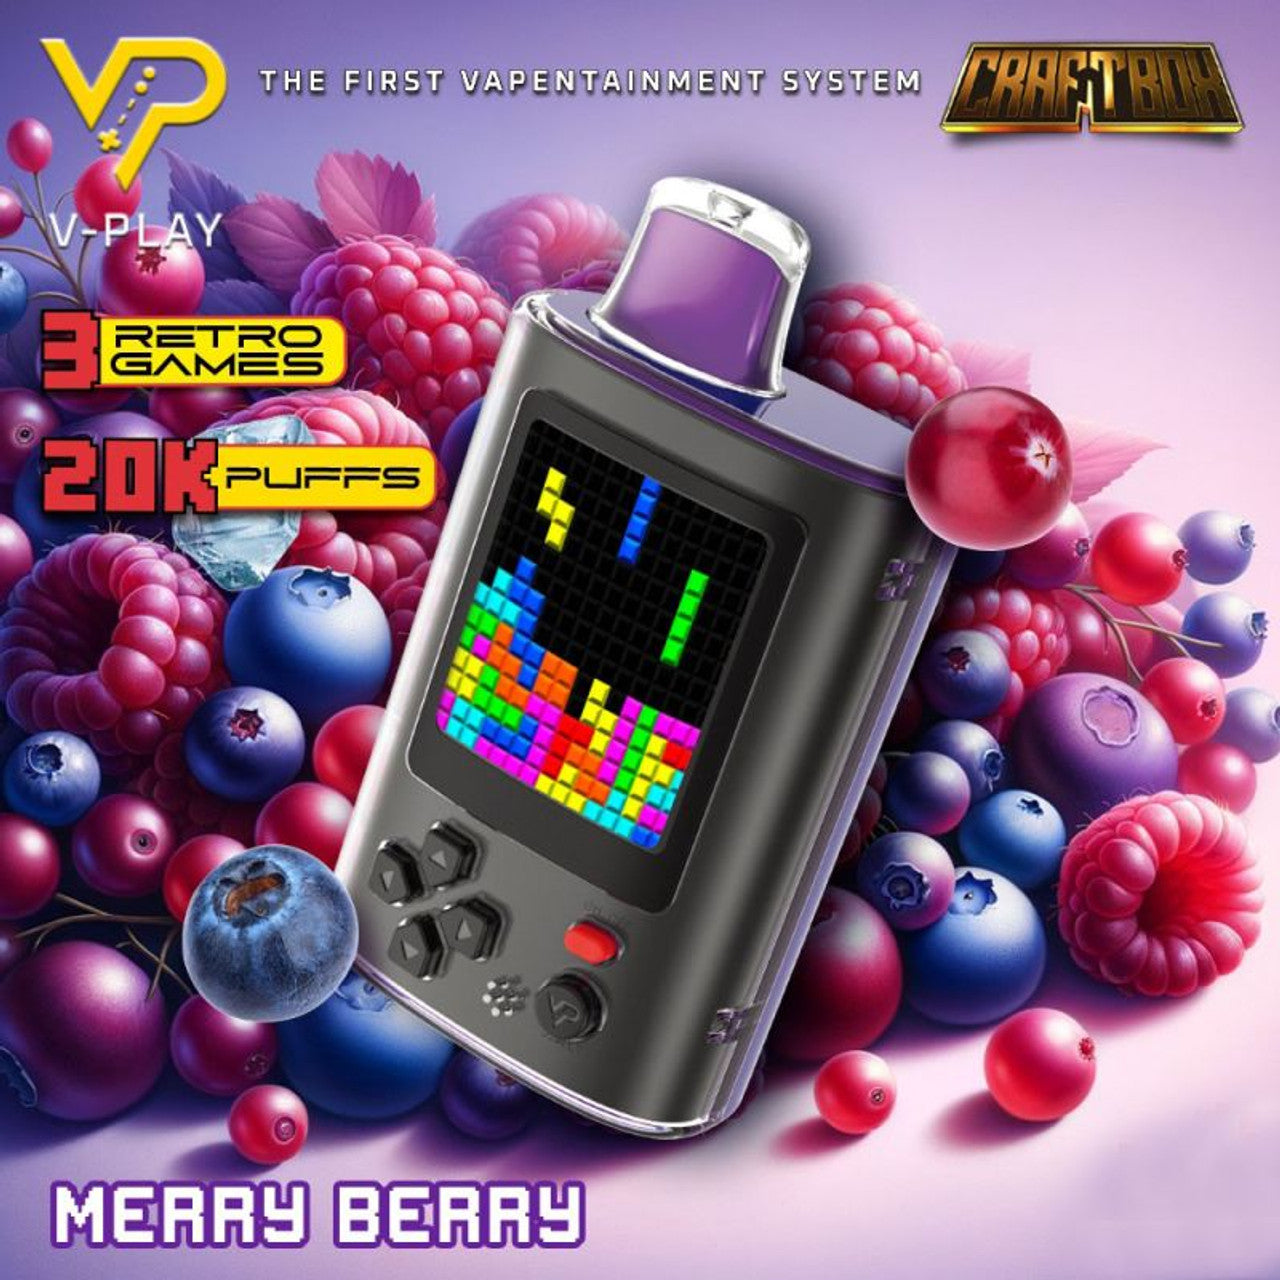 CRAFTBOX V-Play 20K [+3 Games] Rechargeable Disposable [20,000]